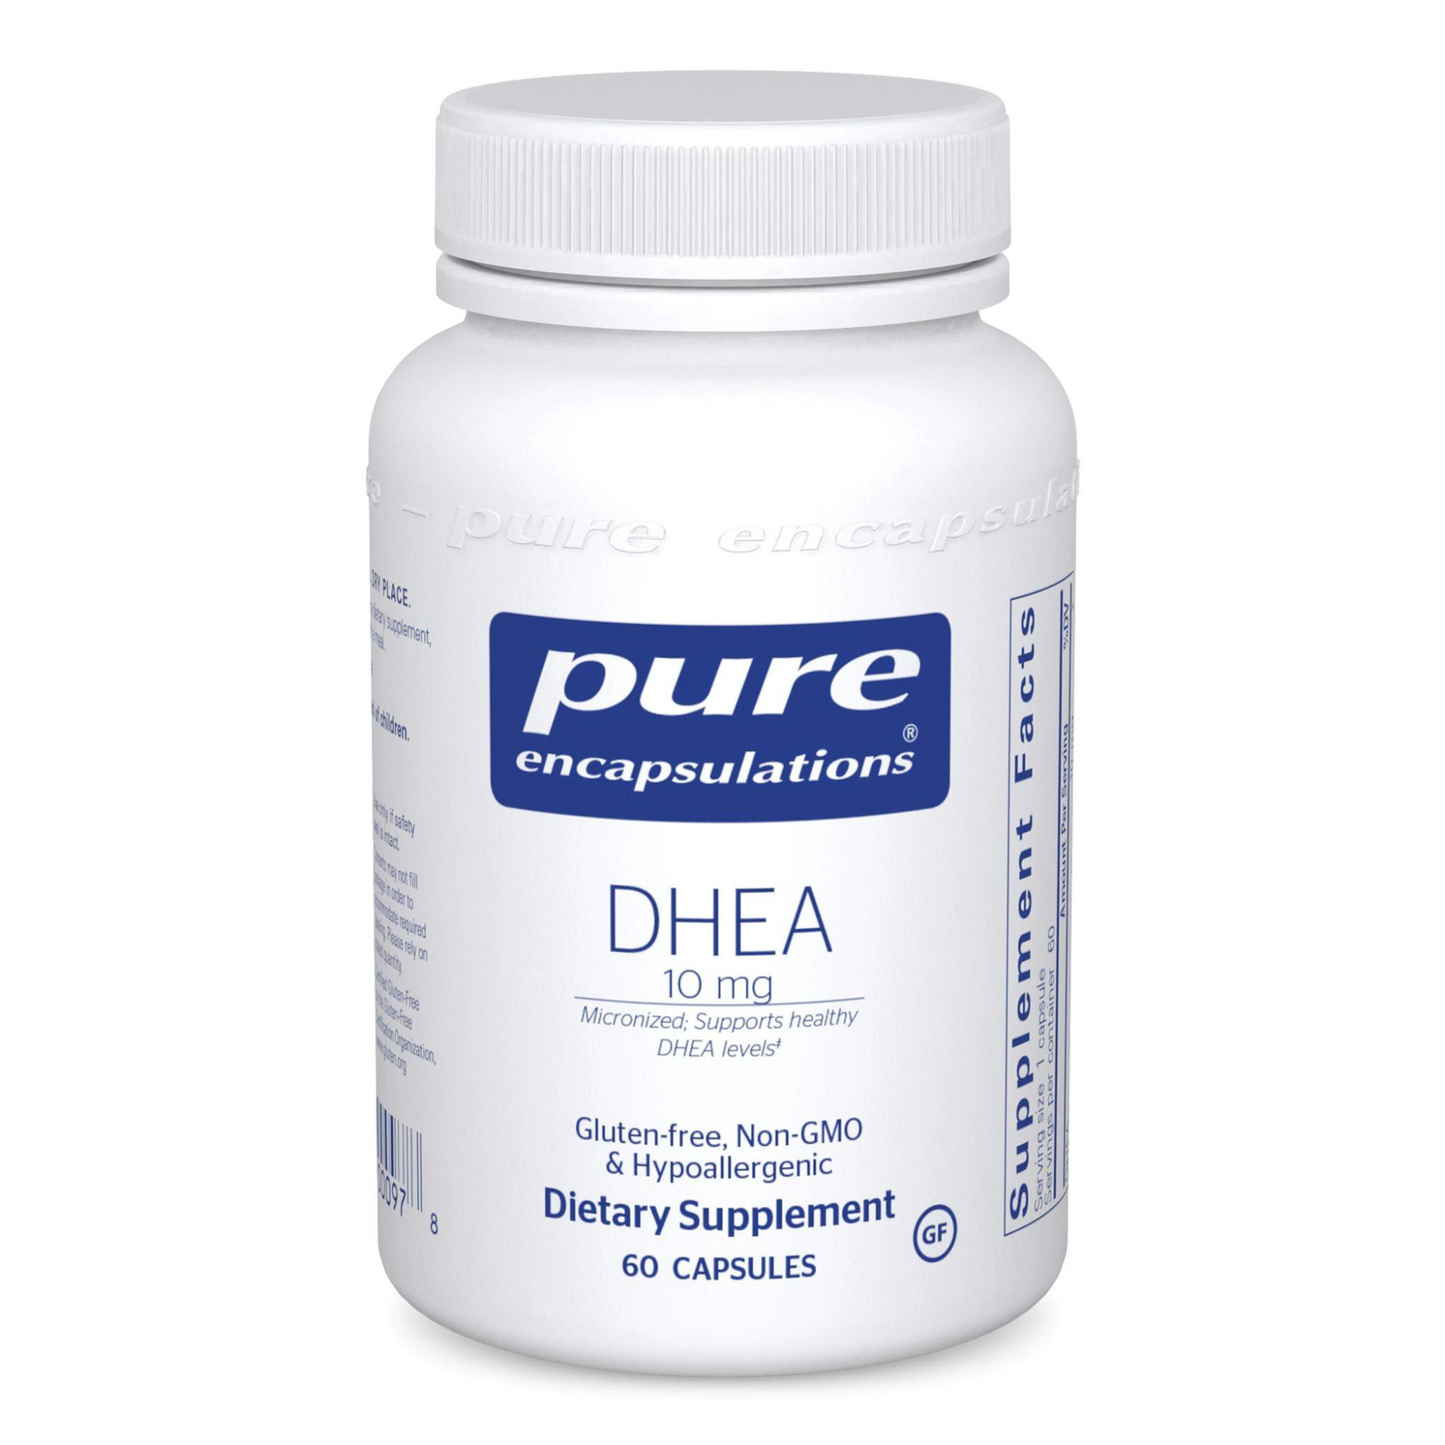 Primary Image of DHEA 10 mg. Capsules (60 count)